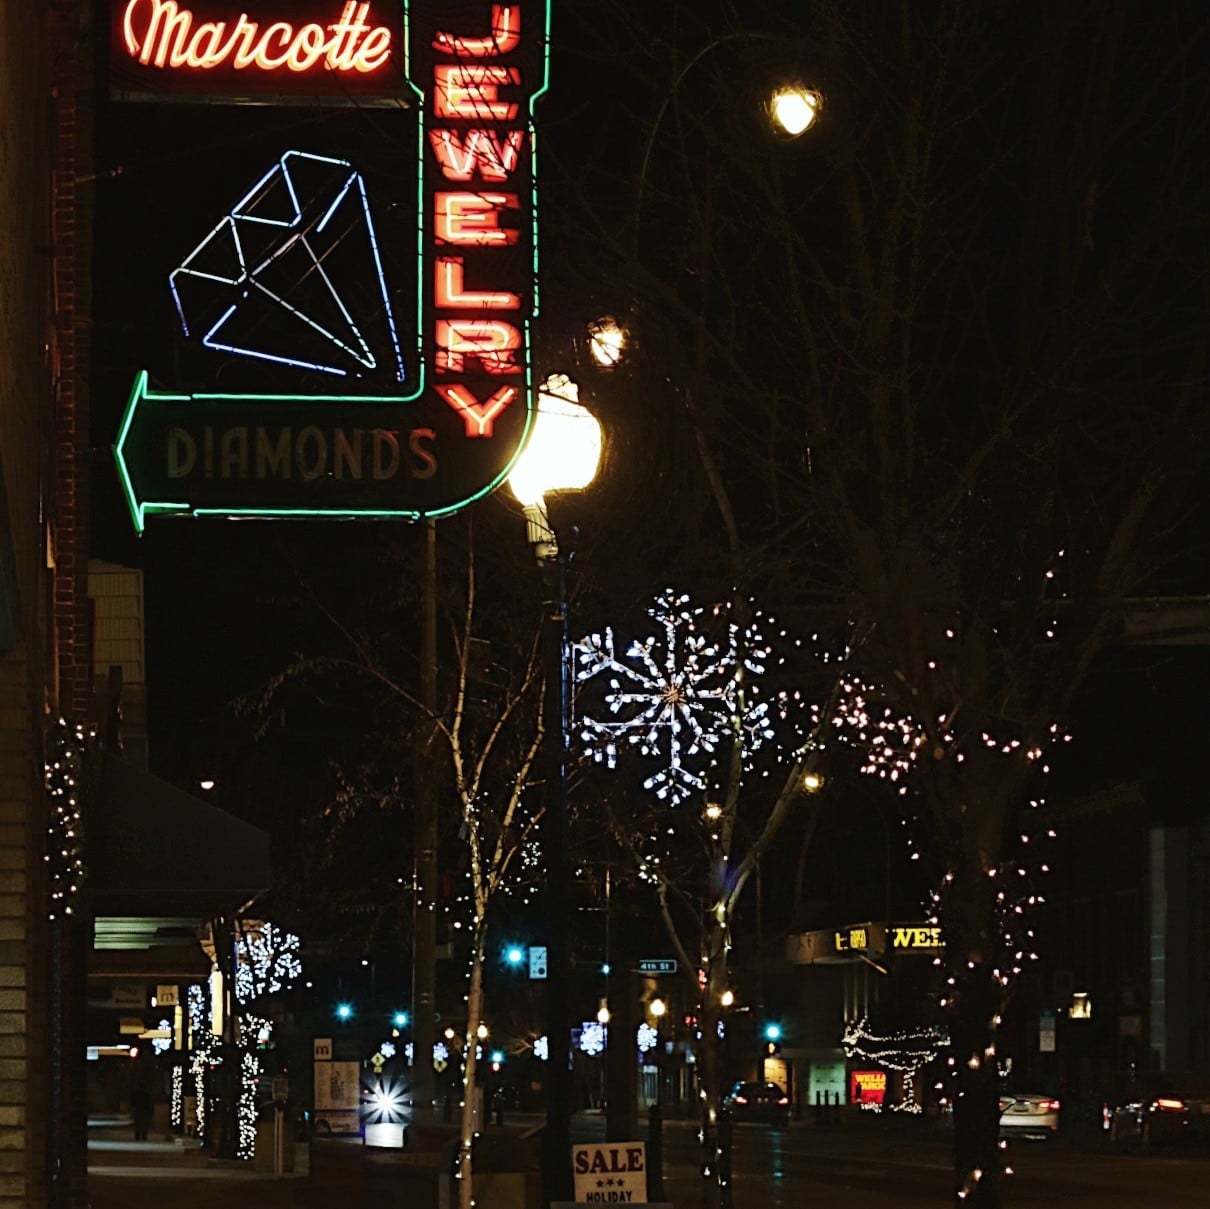 Downtown Marshall - Main Street Marcotte Jewelry Lights at Night